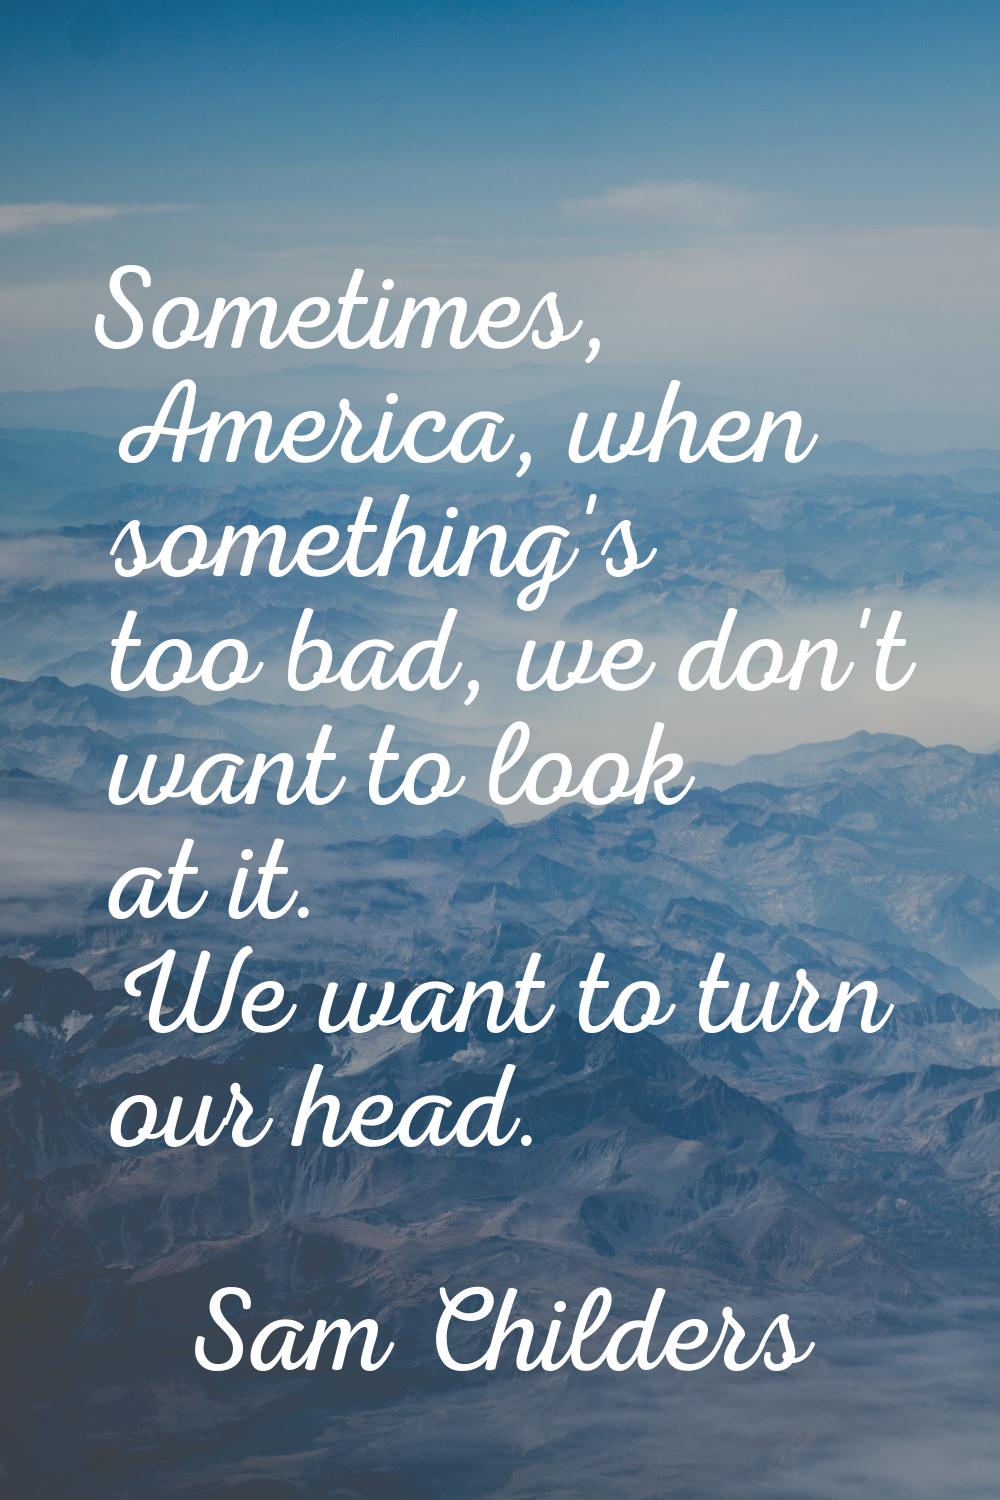 Sometimes, America, when something's too bad, we don't want to look at it. We want to turn our head